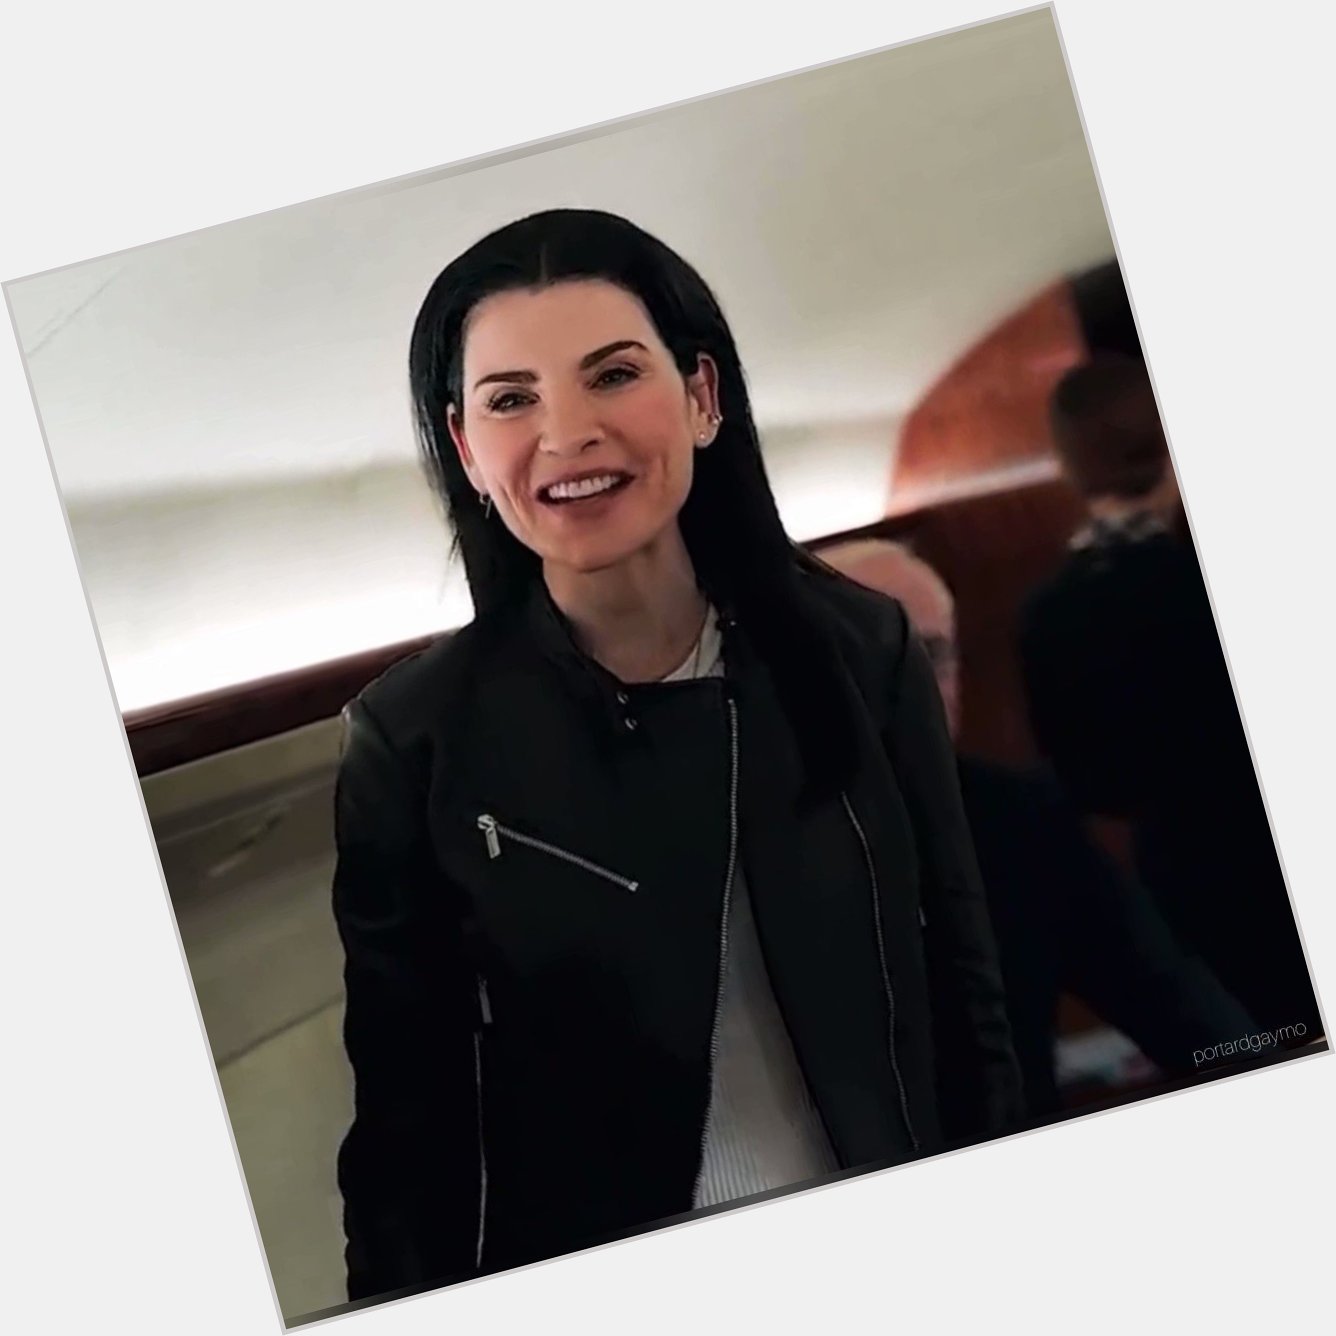 Happy birthday to the mifliest milf there is!!! @ julianna margulies 